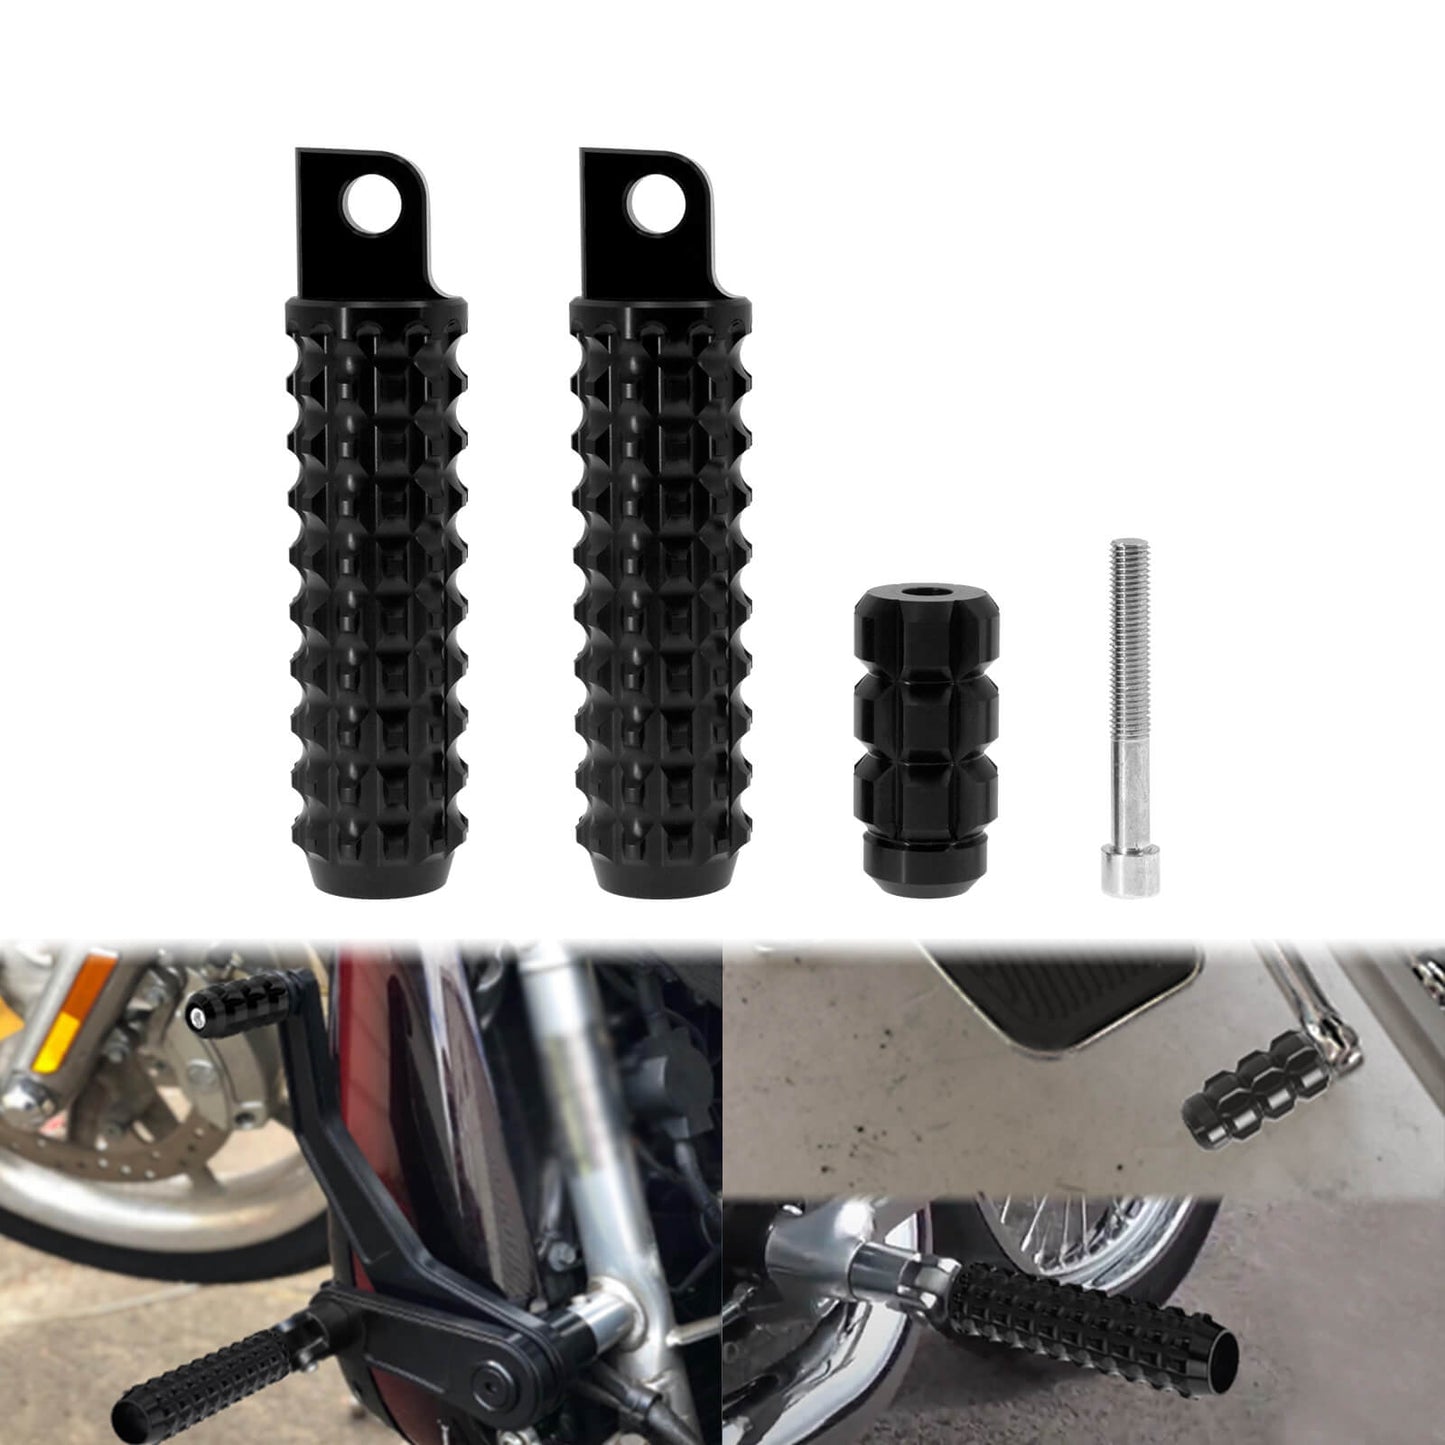 ZH000877-Hollow-footpegs-shifter-set-for-harley